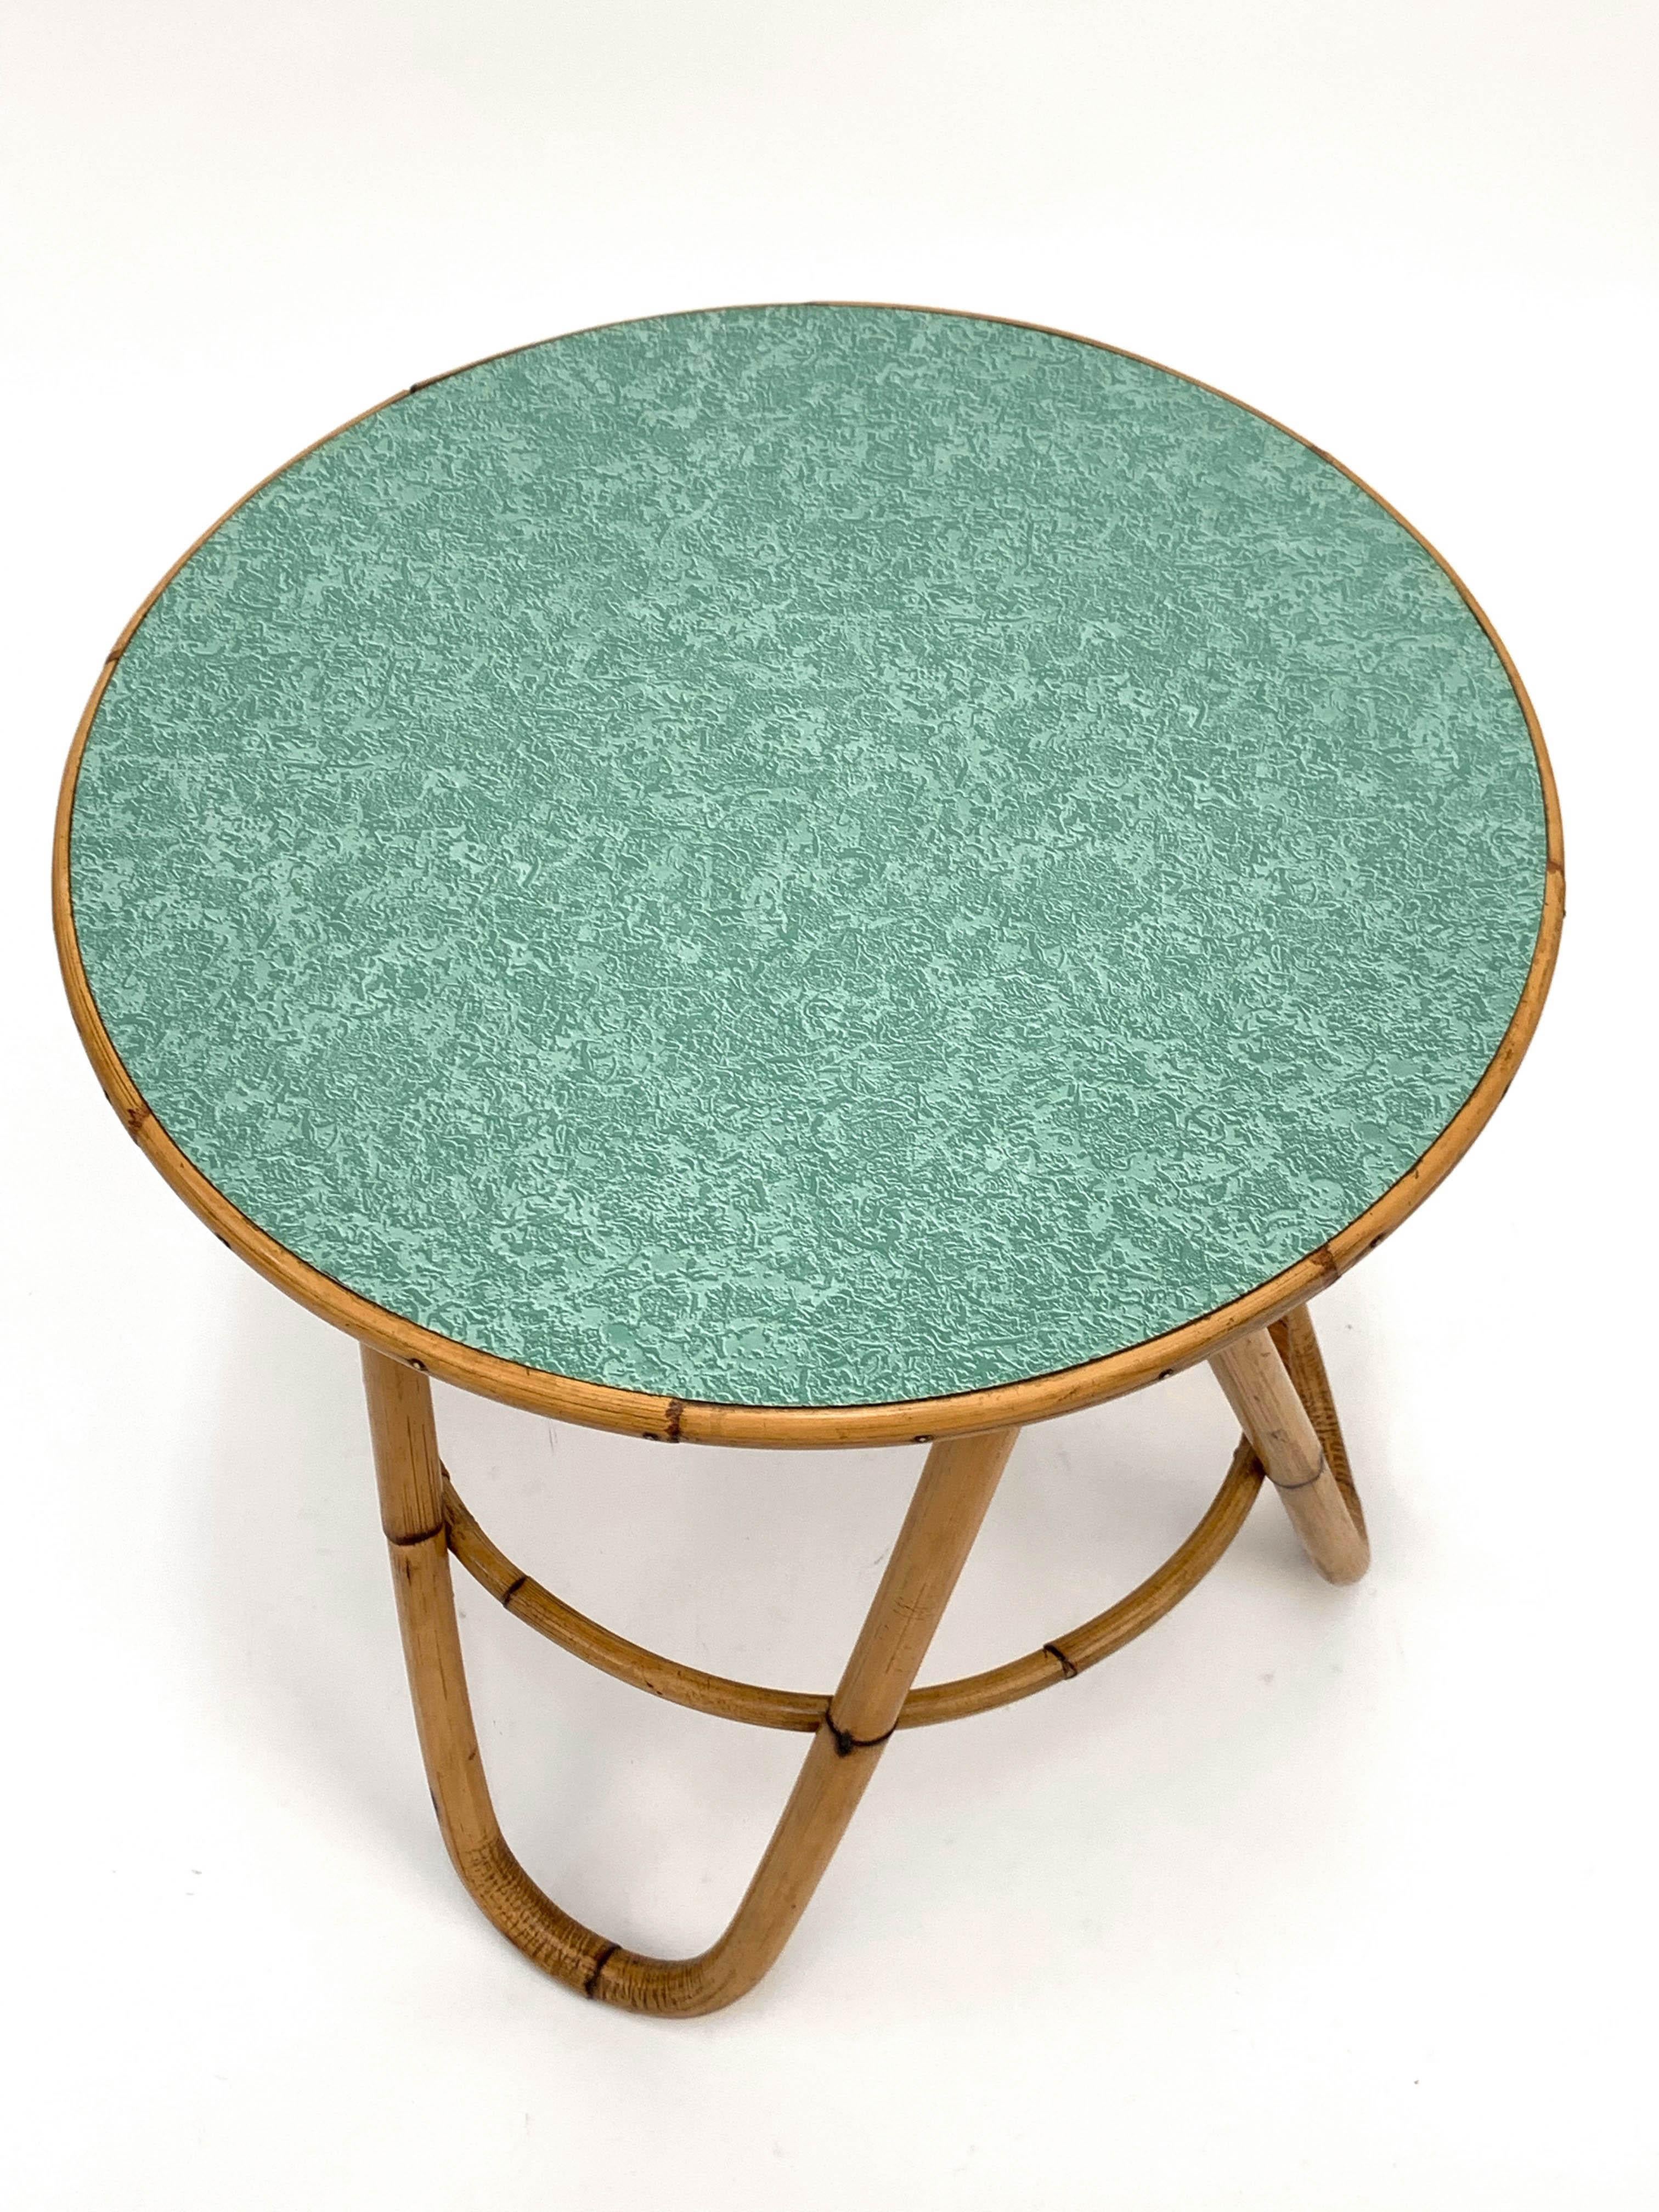 Amazing midcentury bamboo and green Formica round side coffee table. This item was designed in Italy during 1960s.

This wonderful piece has a bamboo structure with an elegant green Formica base, with a typical midcentury green tonality.

This